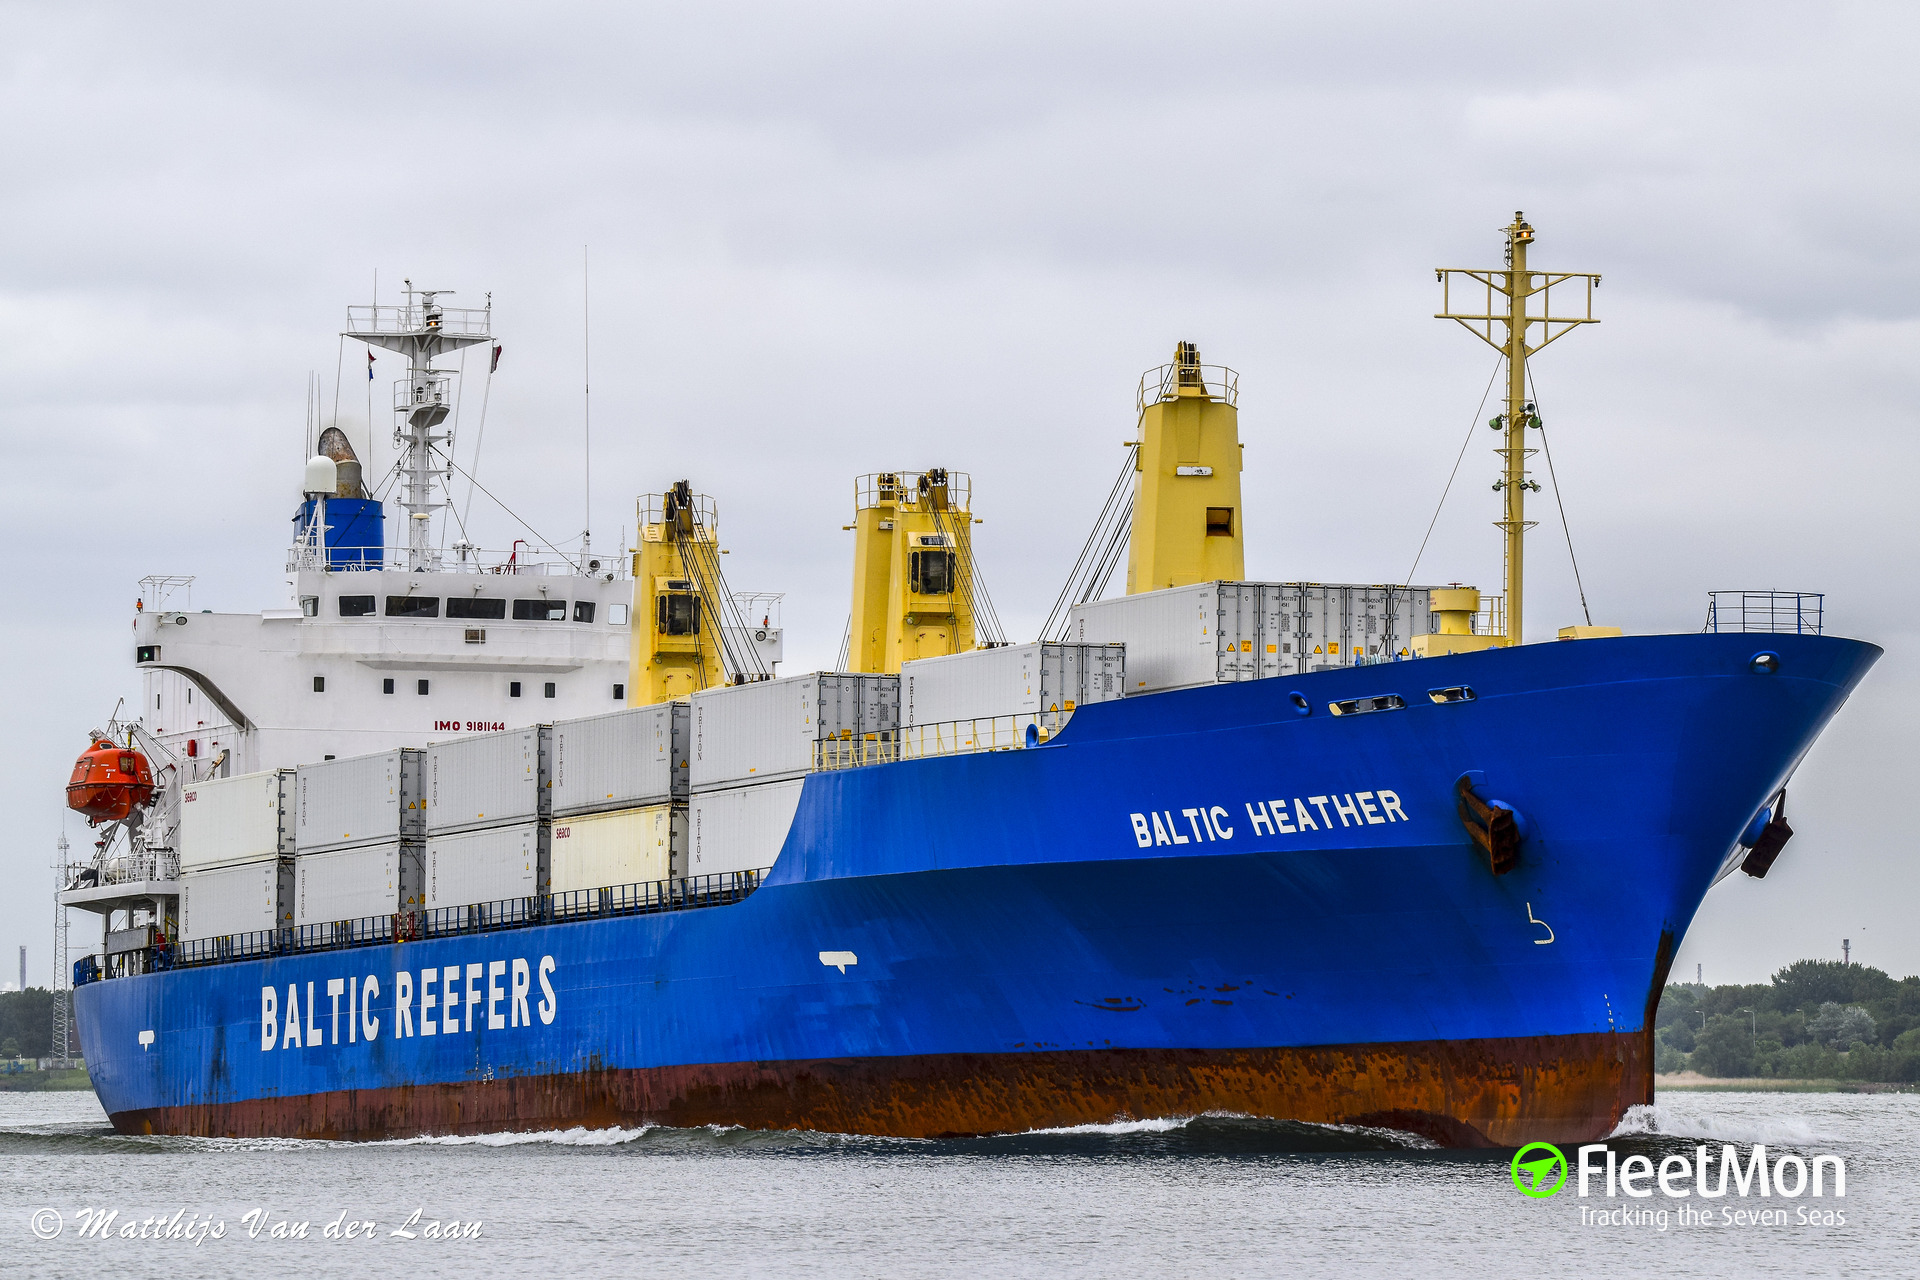 Baltic select. Baltic Heather Reefer. Baltic Heather Vessel. Рефрижераторные суда Baltic Reefers.